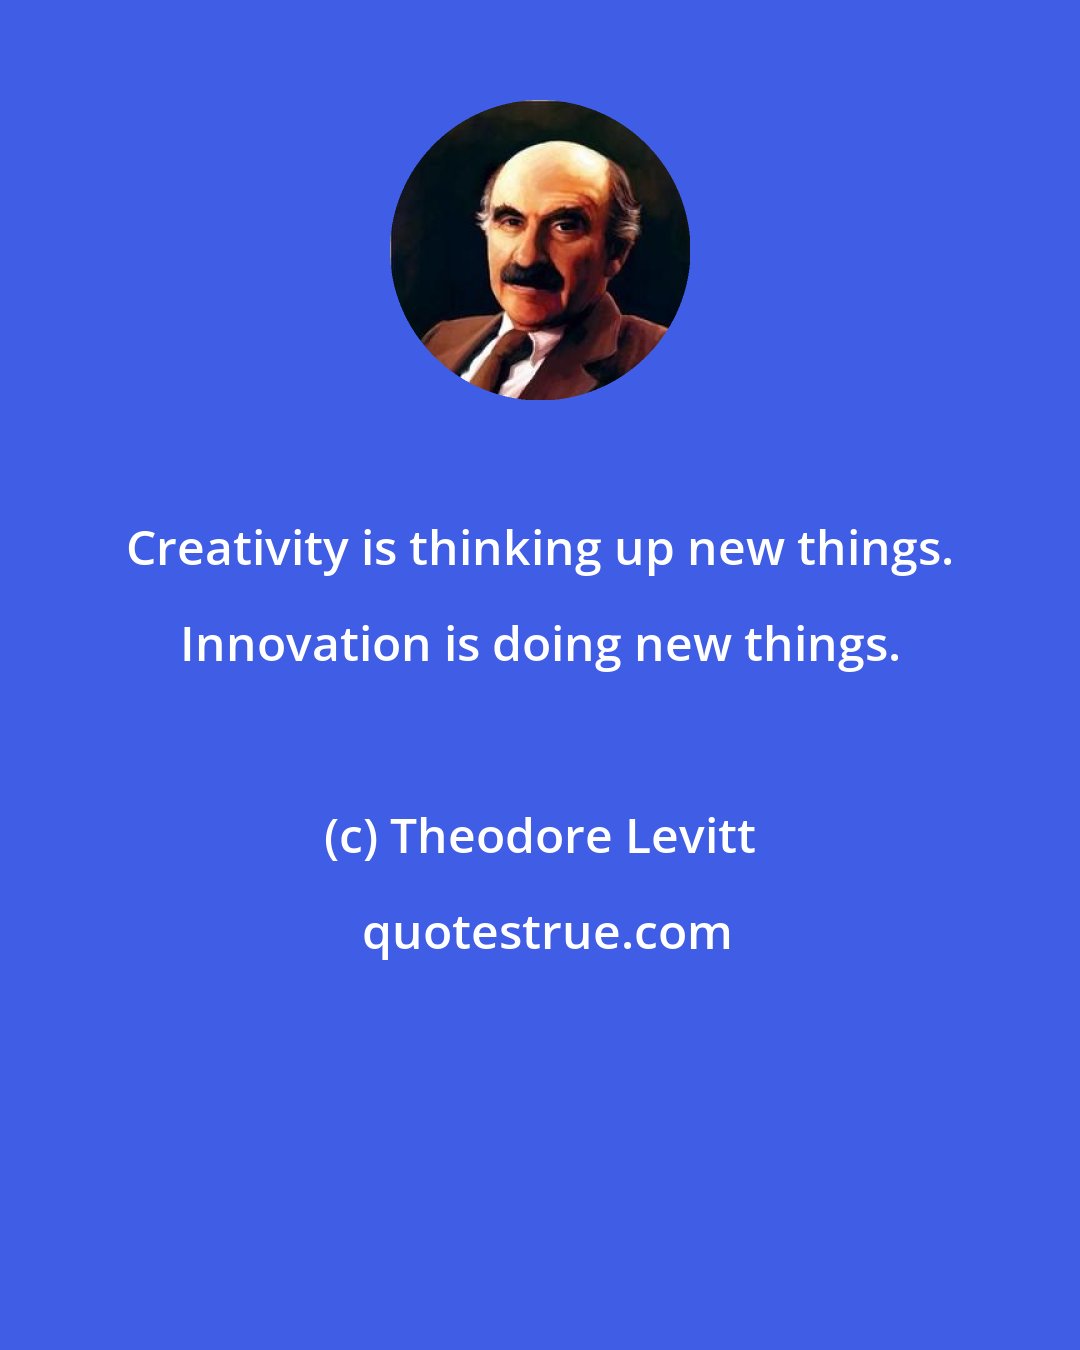 Theodore Levitt: Creativity is thinking up new things. Innovation is doing new things.